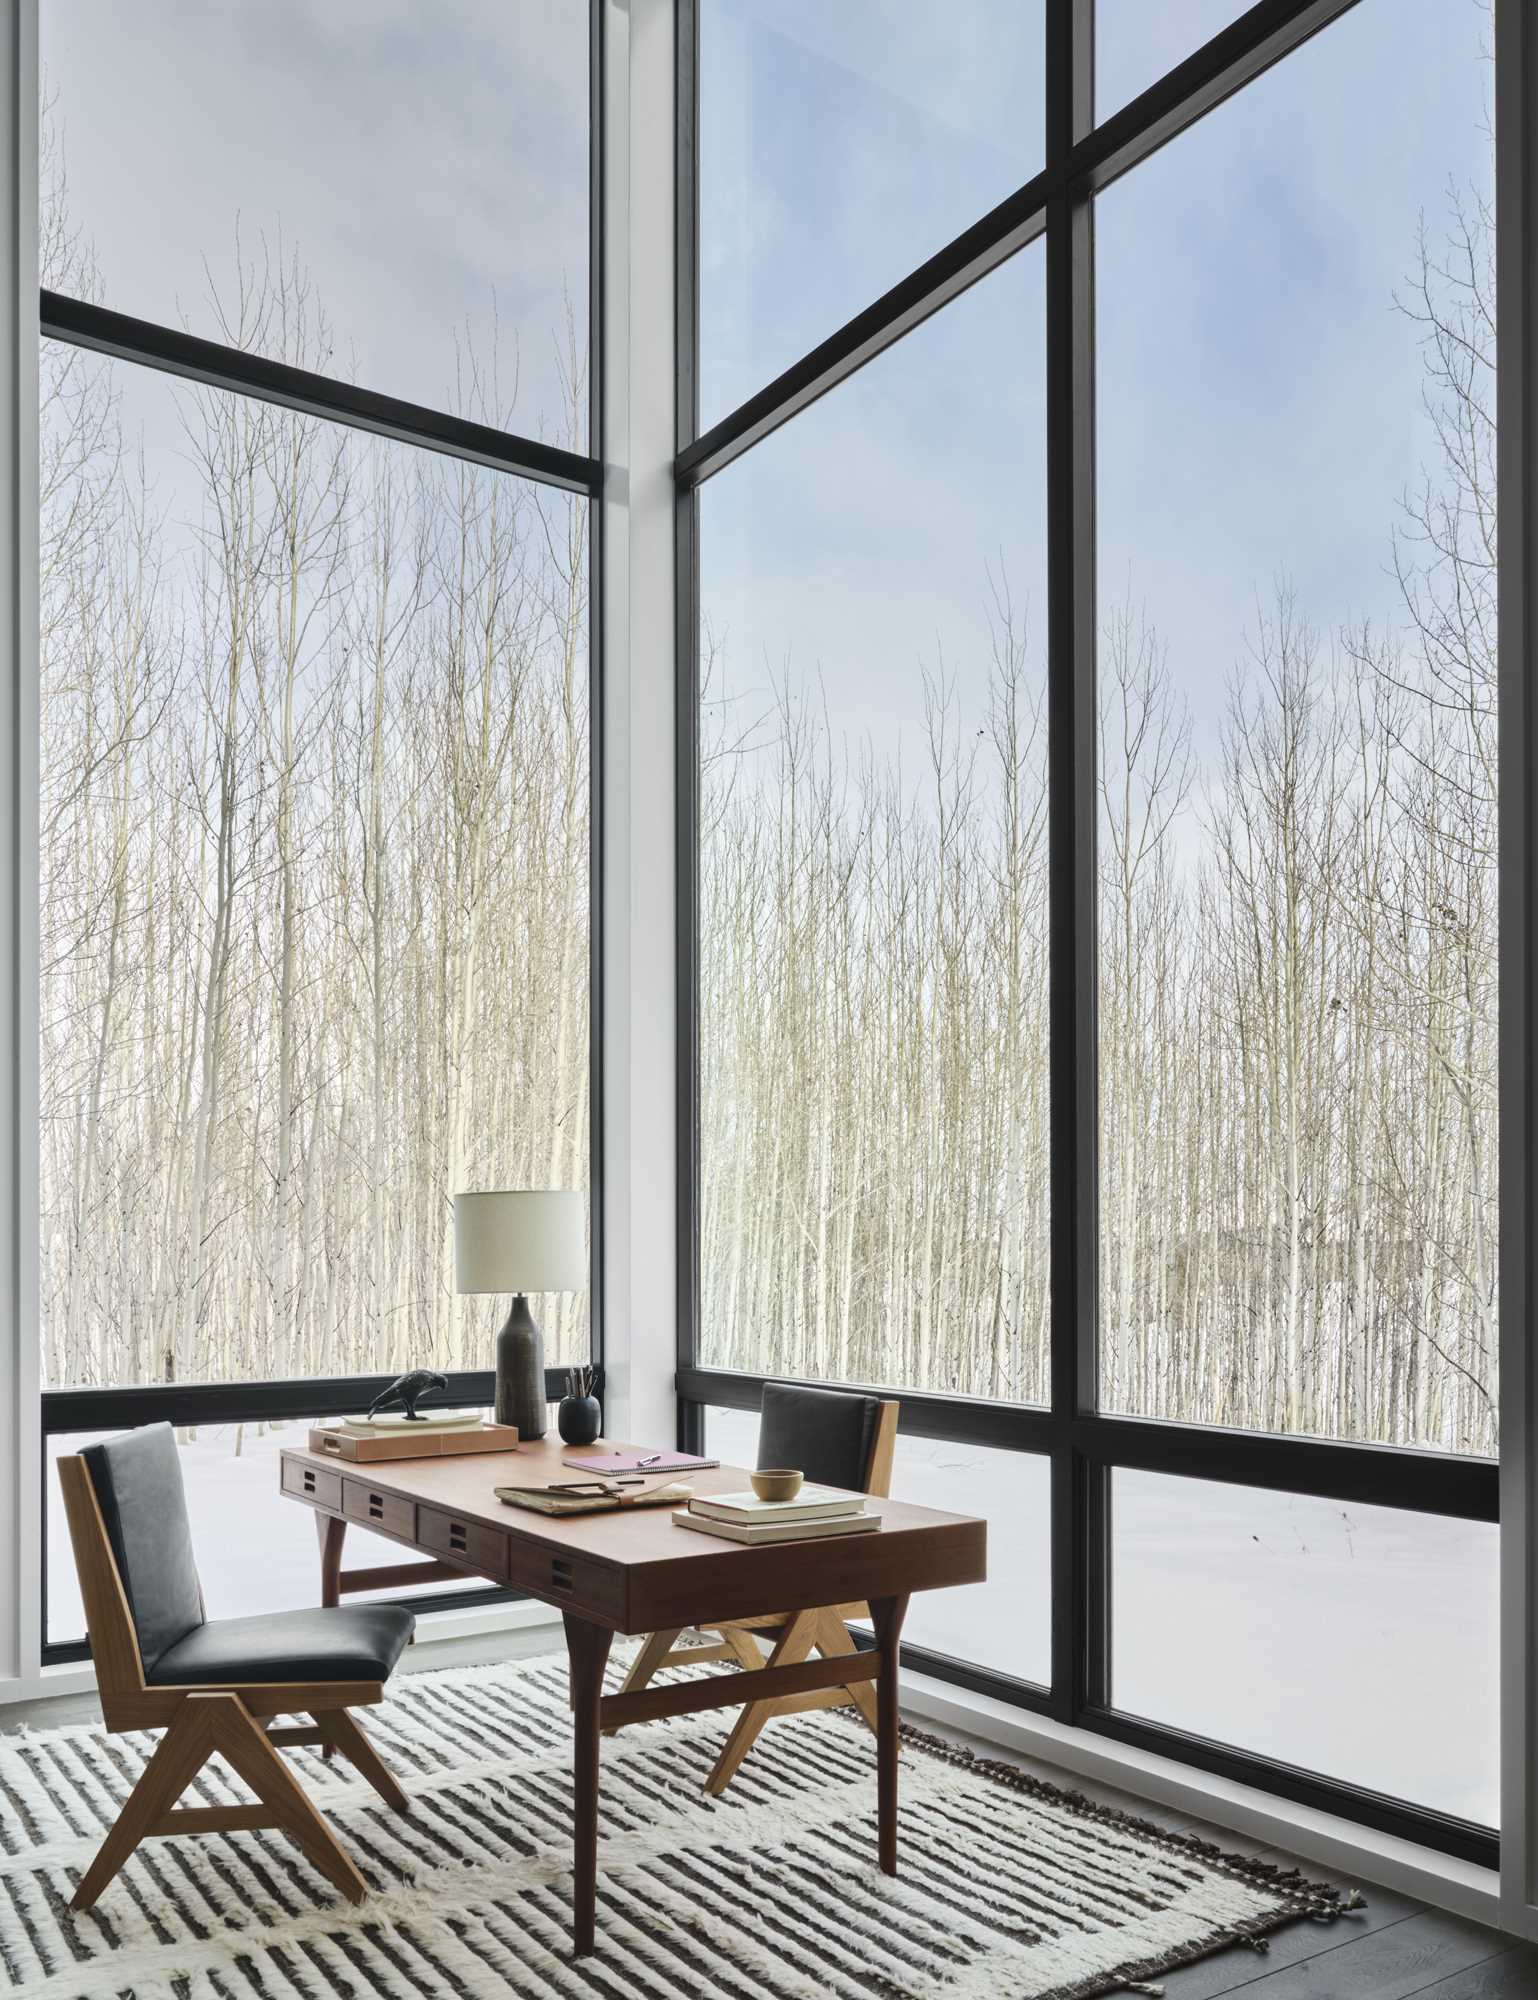 A home office is flooded with natural light from the tall black-framed windows.